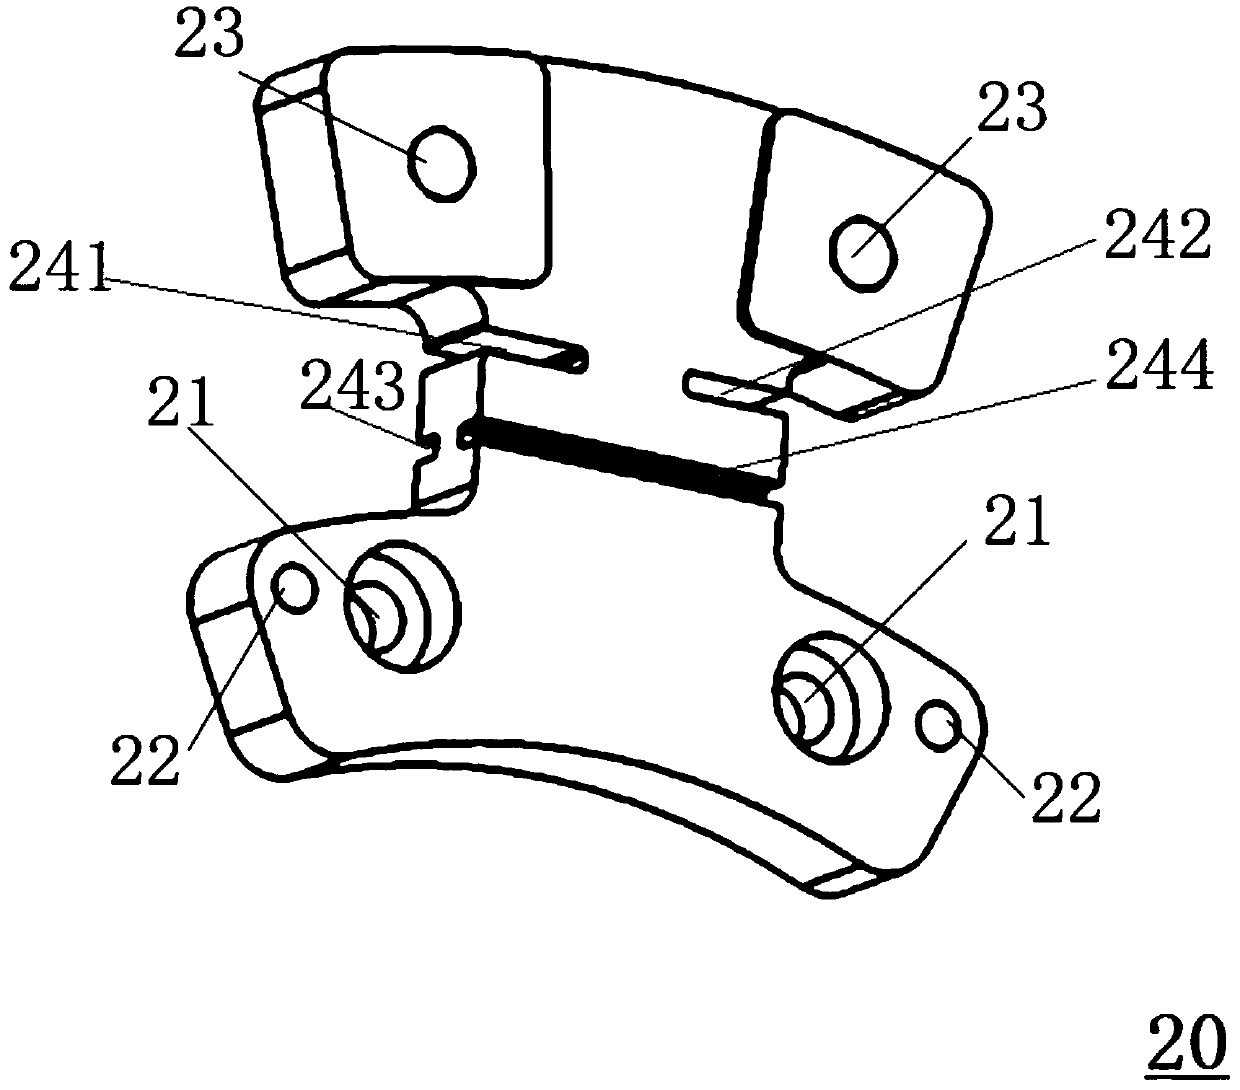 A detachable flexible support assembly